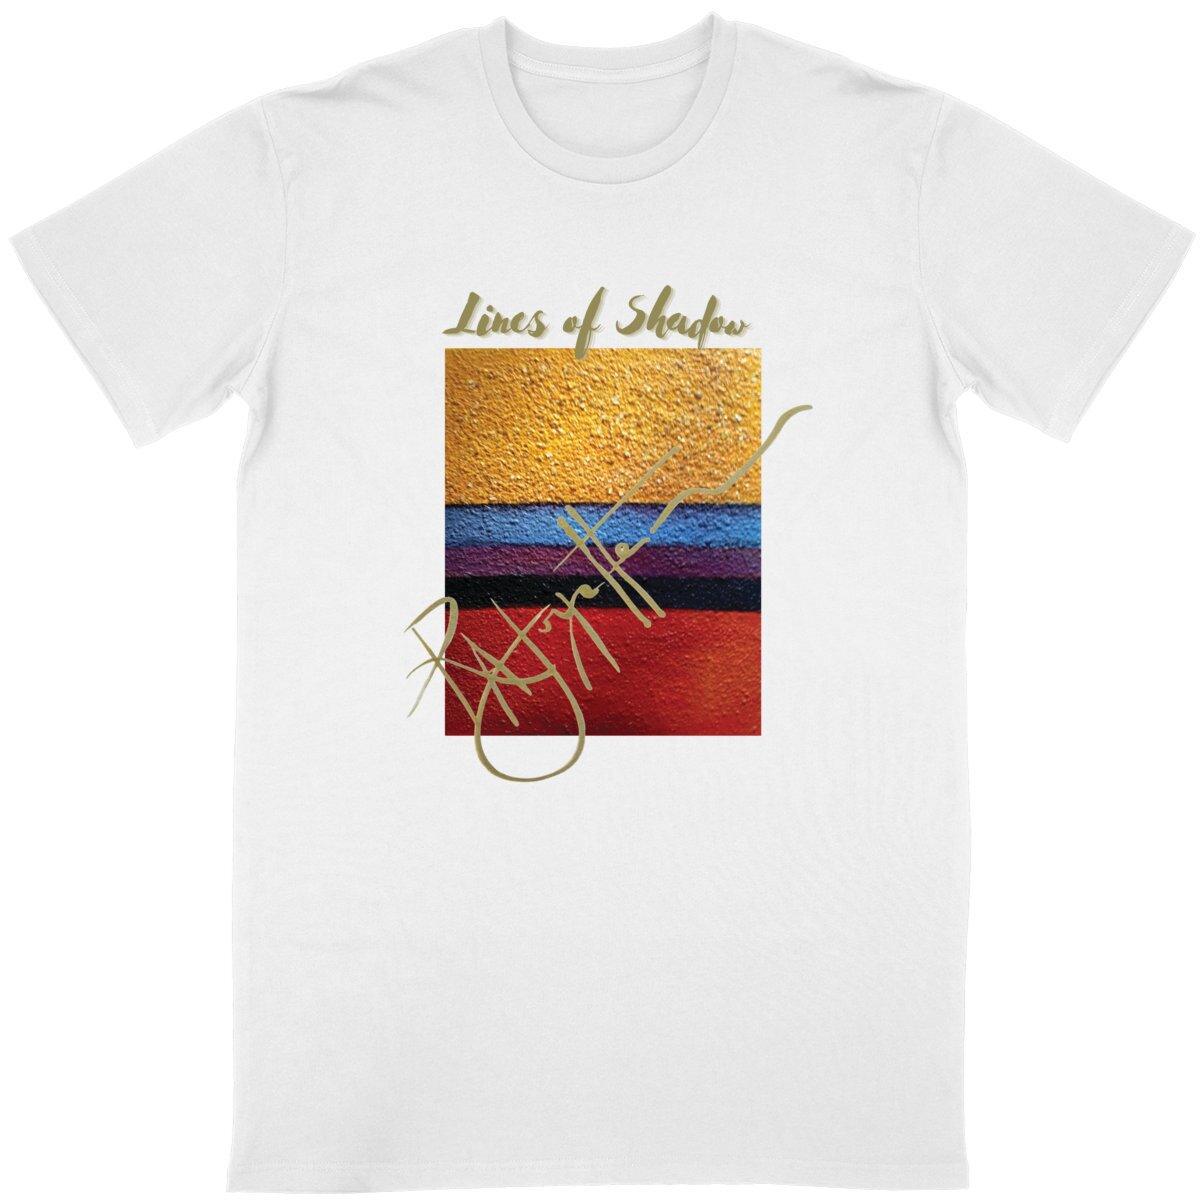 Lines of Shadow Unisex T-shirt, made from 100% organic cotton, designed by Tree of Life Art, combines environmental responsibility with artistic flair.